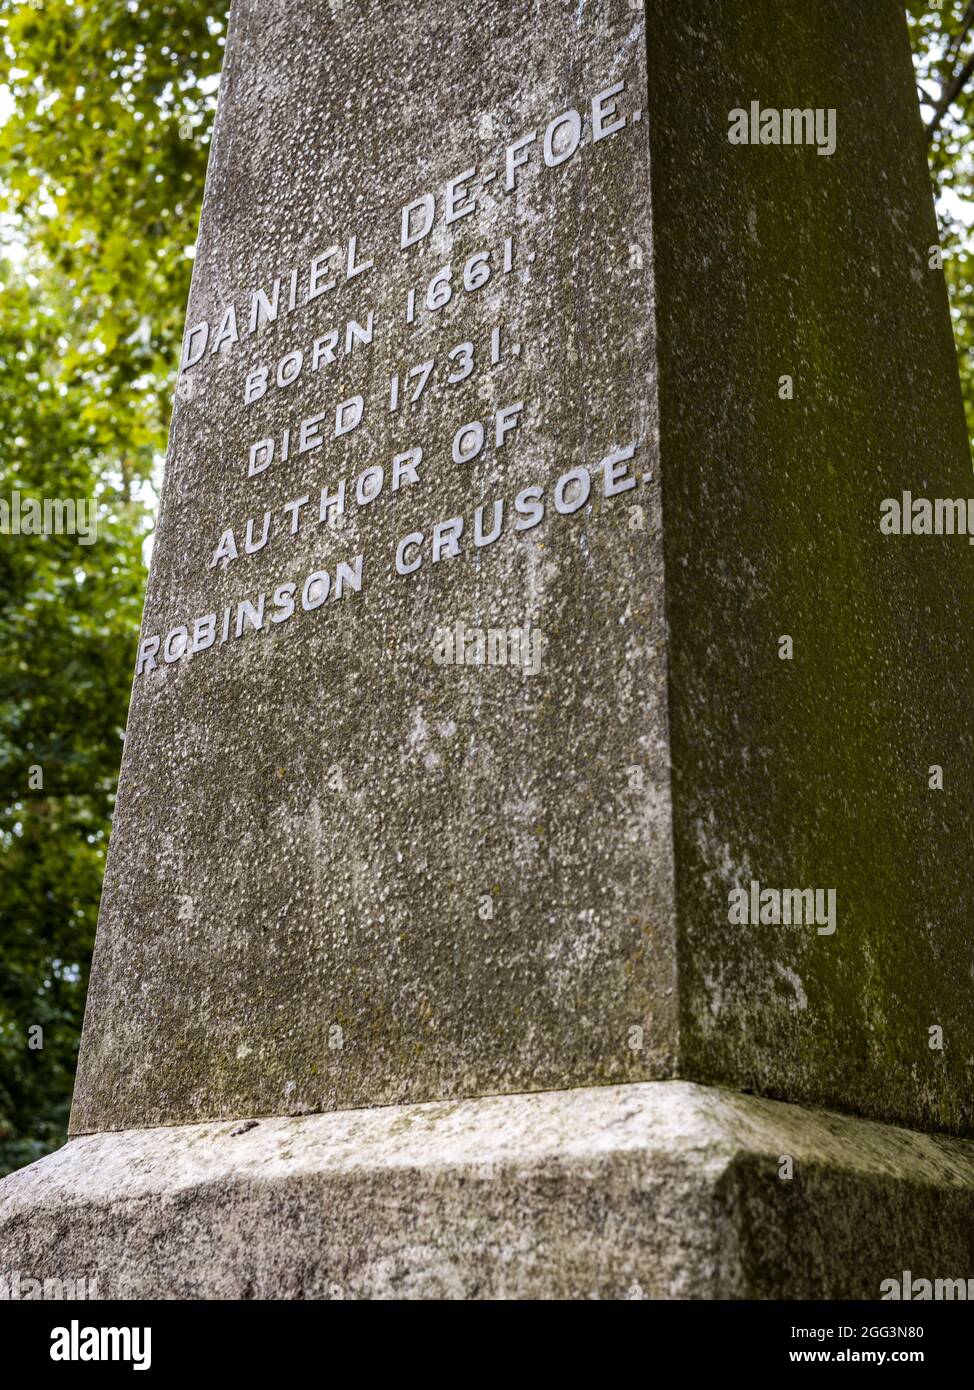 Daniel Defoe tombstone at Bunhill Fields Burial Ground in London. Defoe 1661-1731 was the author of Robinson Crusoe. Obelisk erected in 1870. Stock Photo